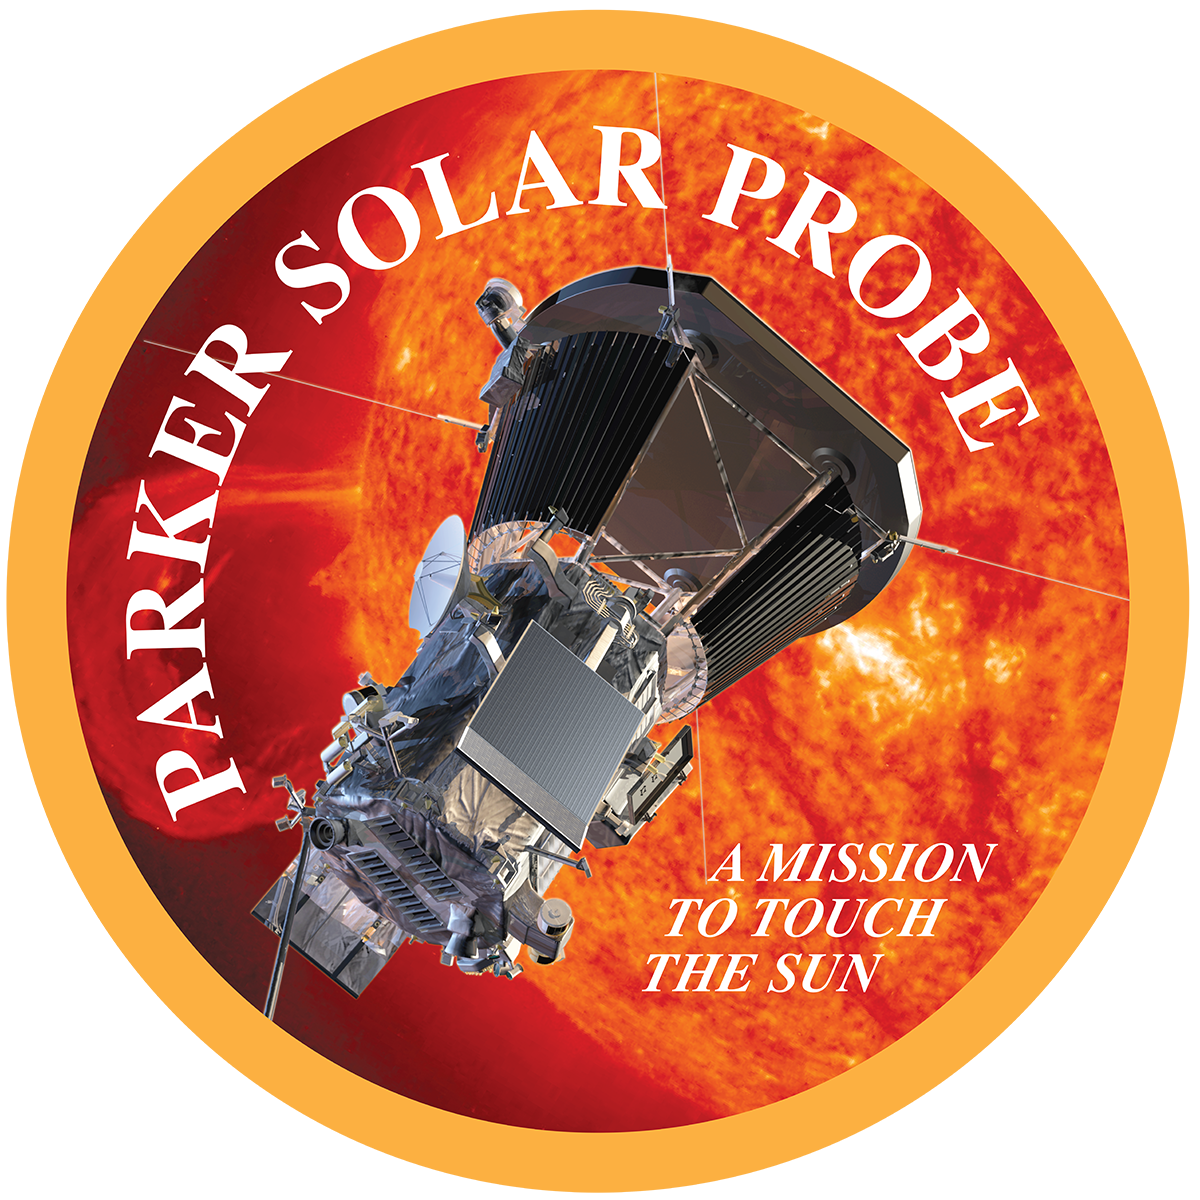 Parker Solar Probe the First Spacecraft to Reach the Sun